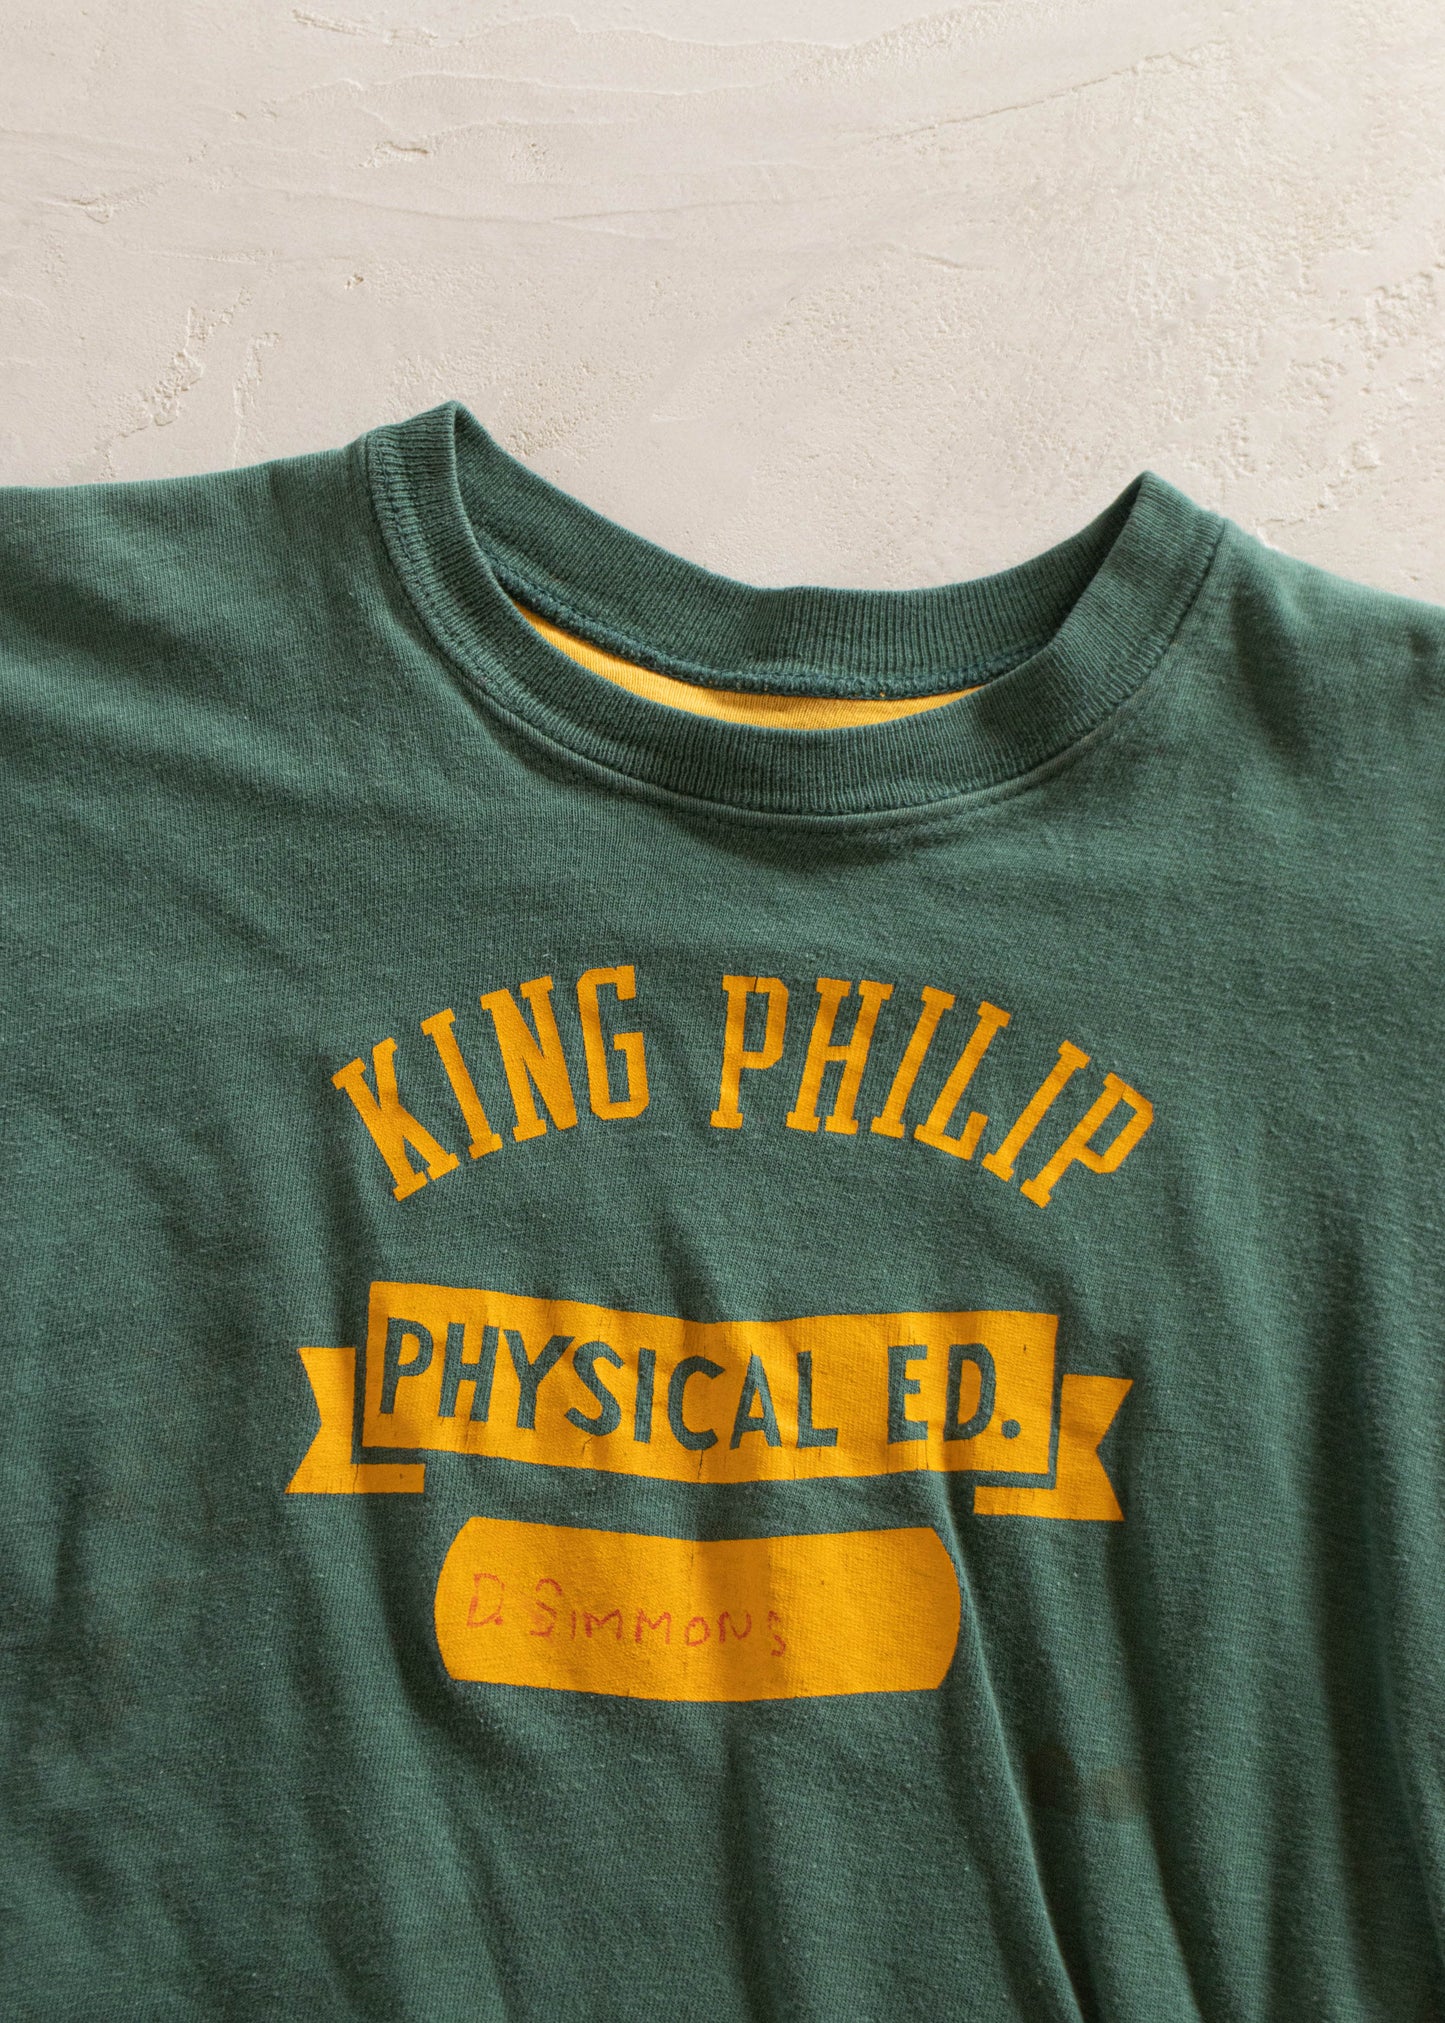 1960s Champion Blue Bar King Philip Double Layer T-Shirt Size S/M